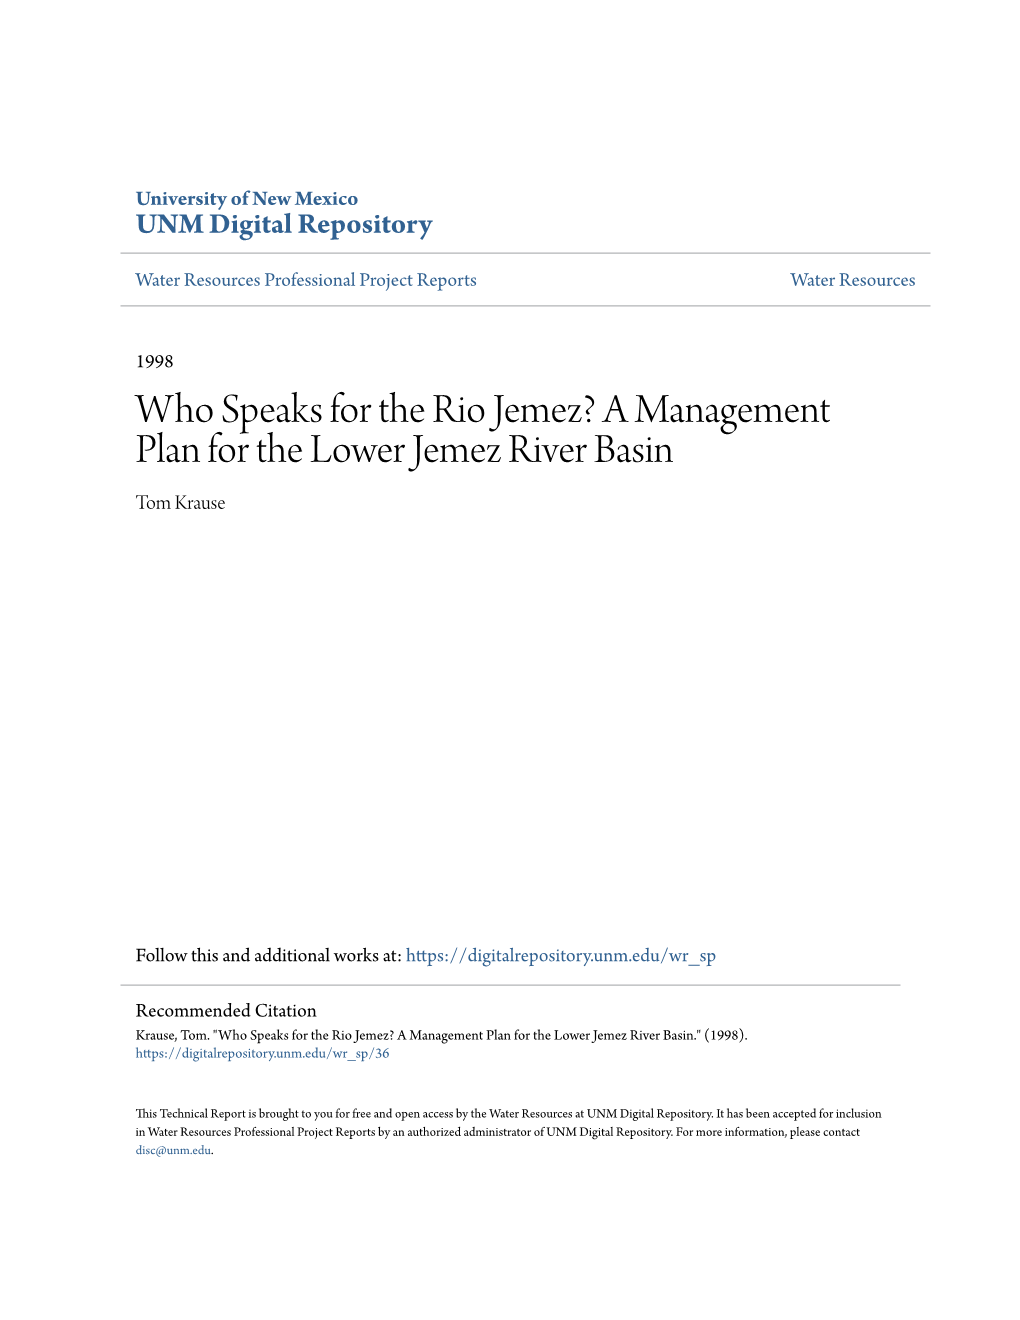 A Management Plan for the Lower Jemez River Basin Tom Krause